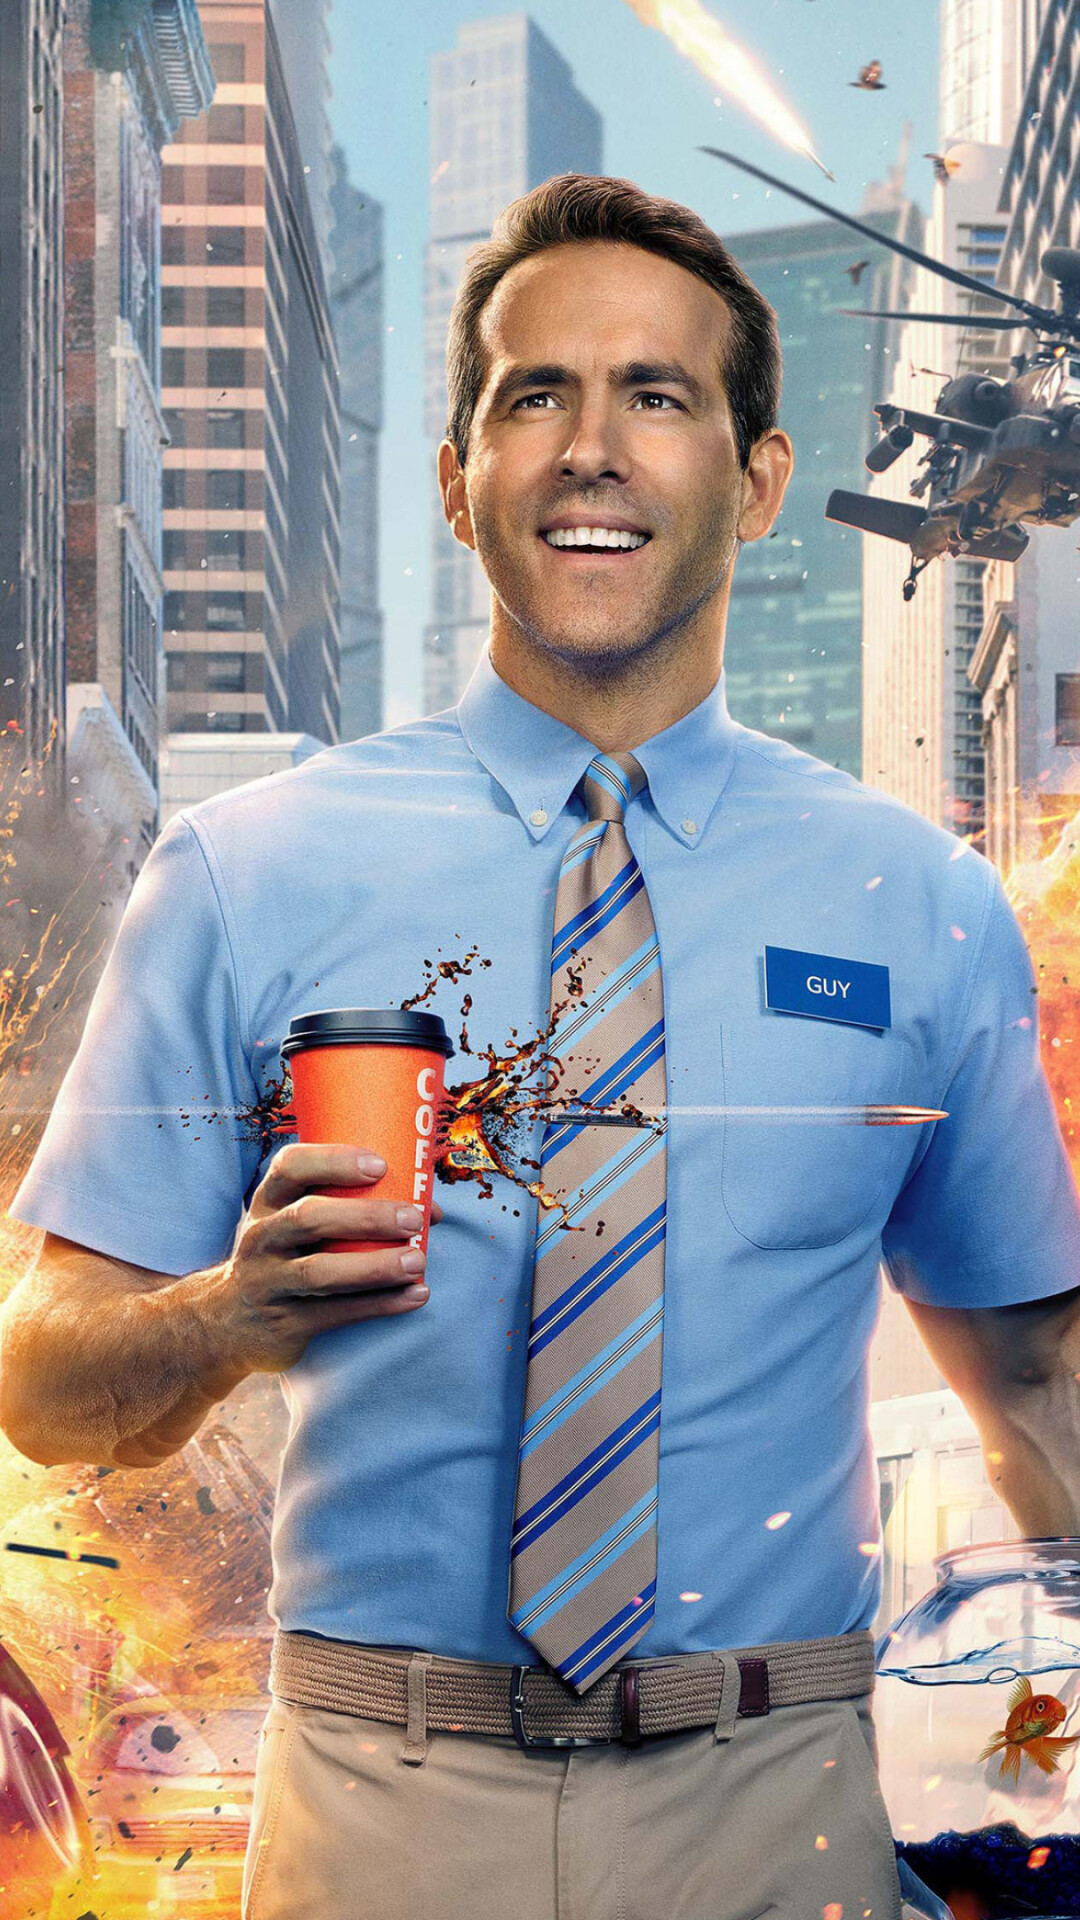 Free Guy: Ryan Reynolds plays a non-playable video game character. 1080x1920 Full HD Wallpaper.